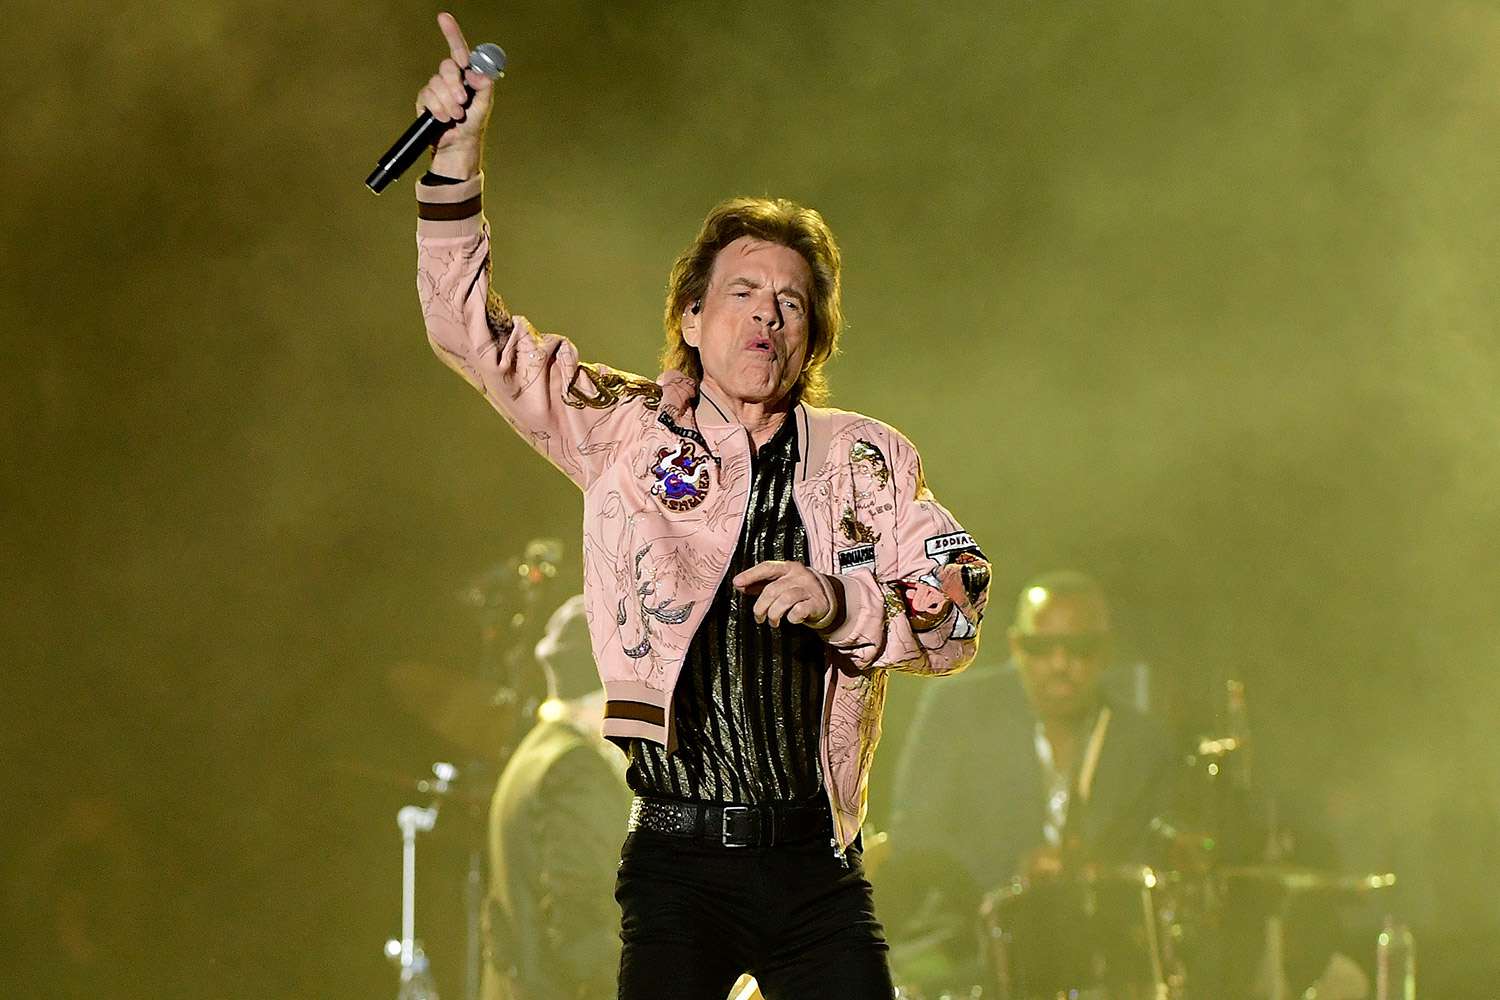 Mick Jagger Hits Back at Paul McCartney In Concert: 'He's Going to Join Us in a Blues Cover Later' - Yahoo Entertainment